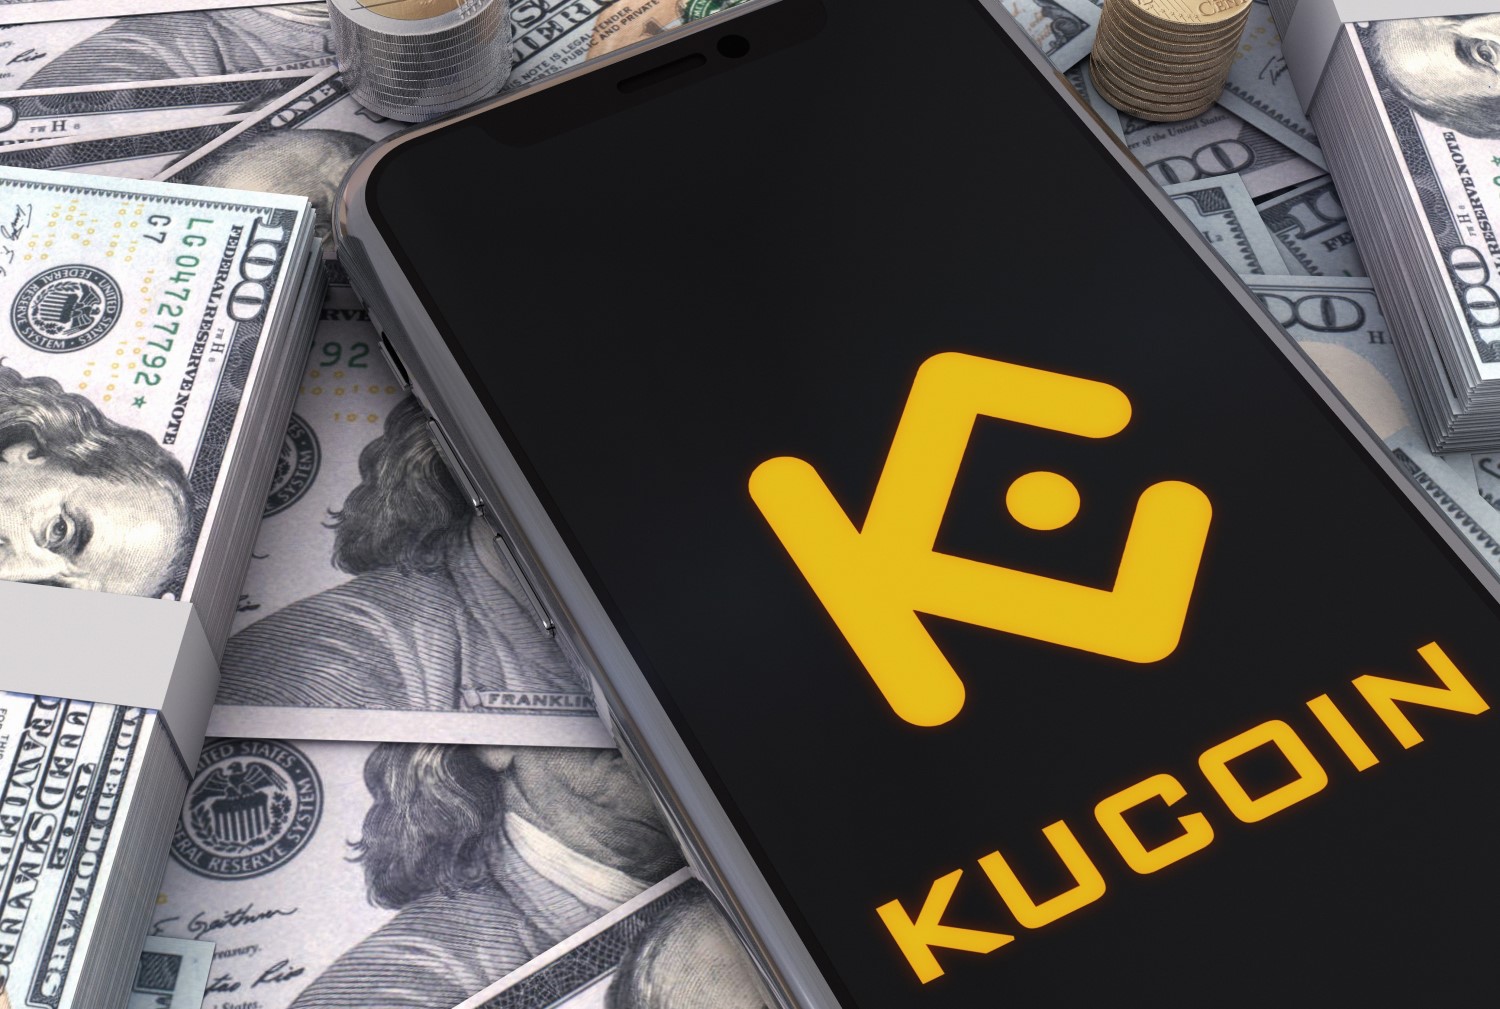 how to exchange crypto in kucoin